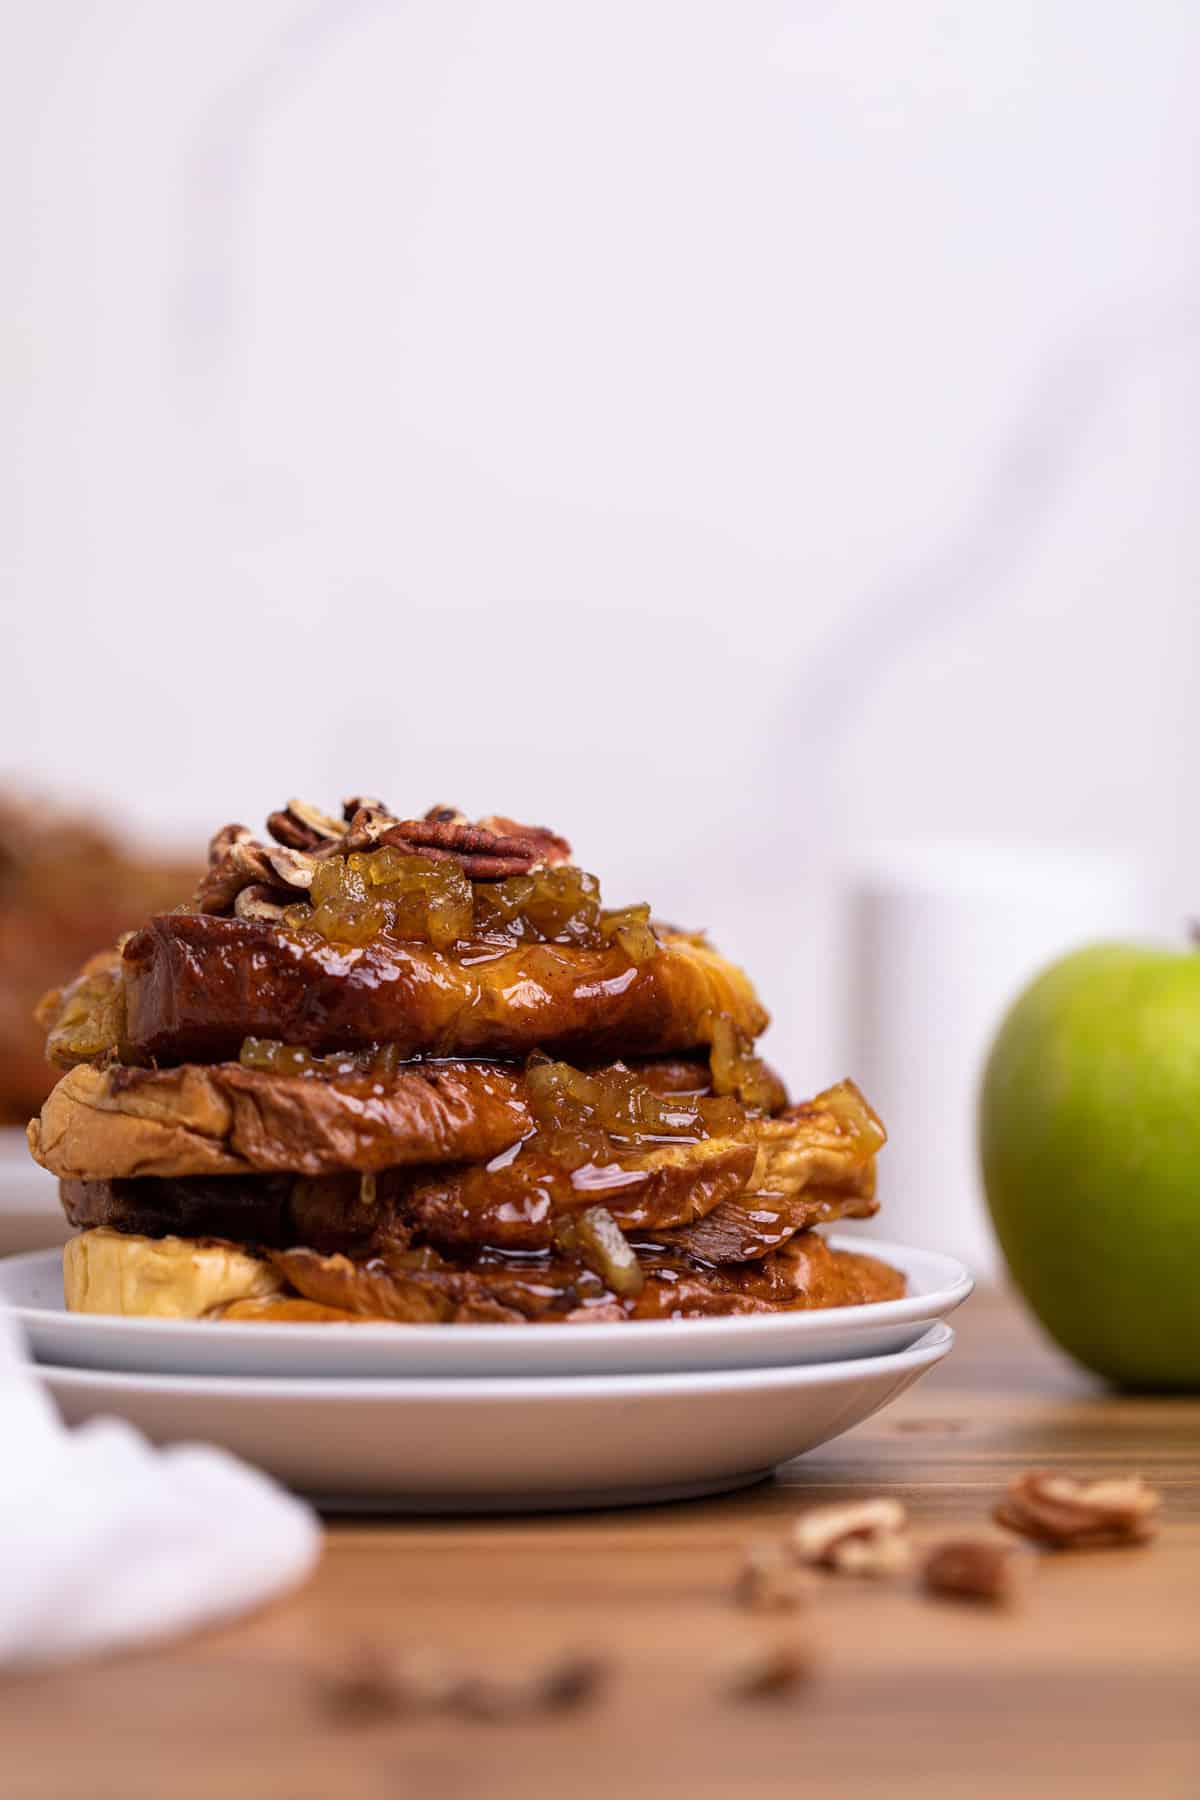 Caramelized Apple French Toast slices on two white plates with a green apple on the side